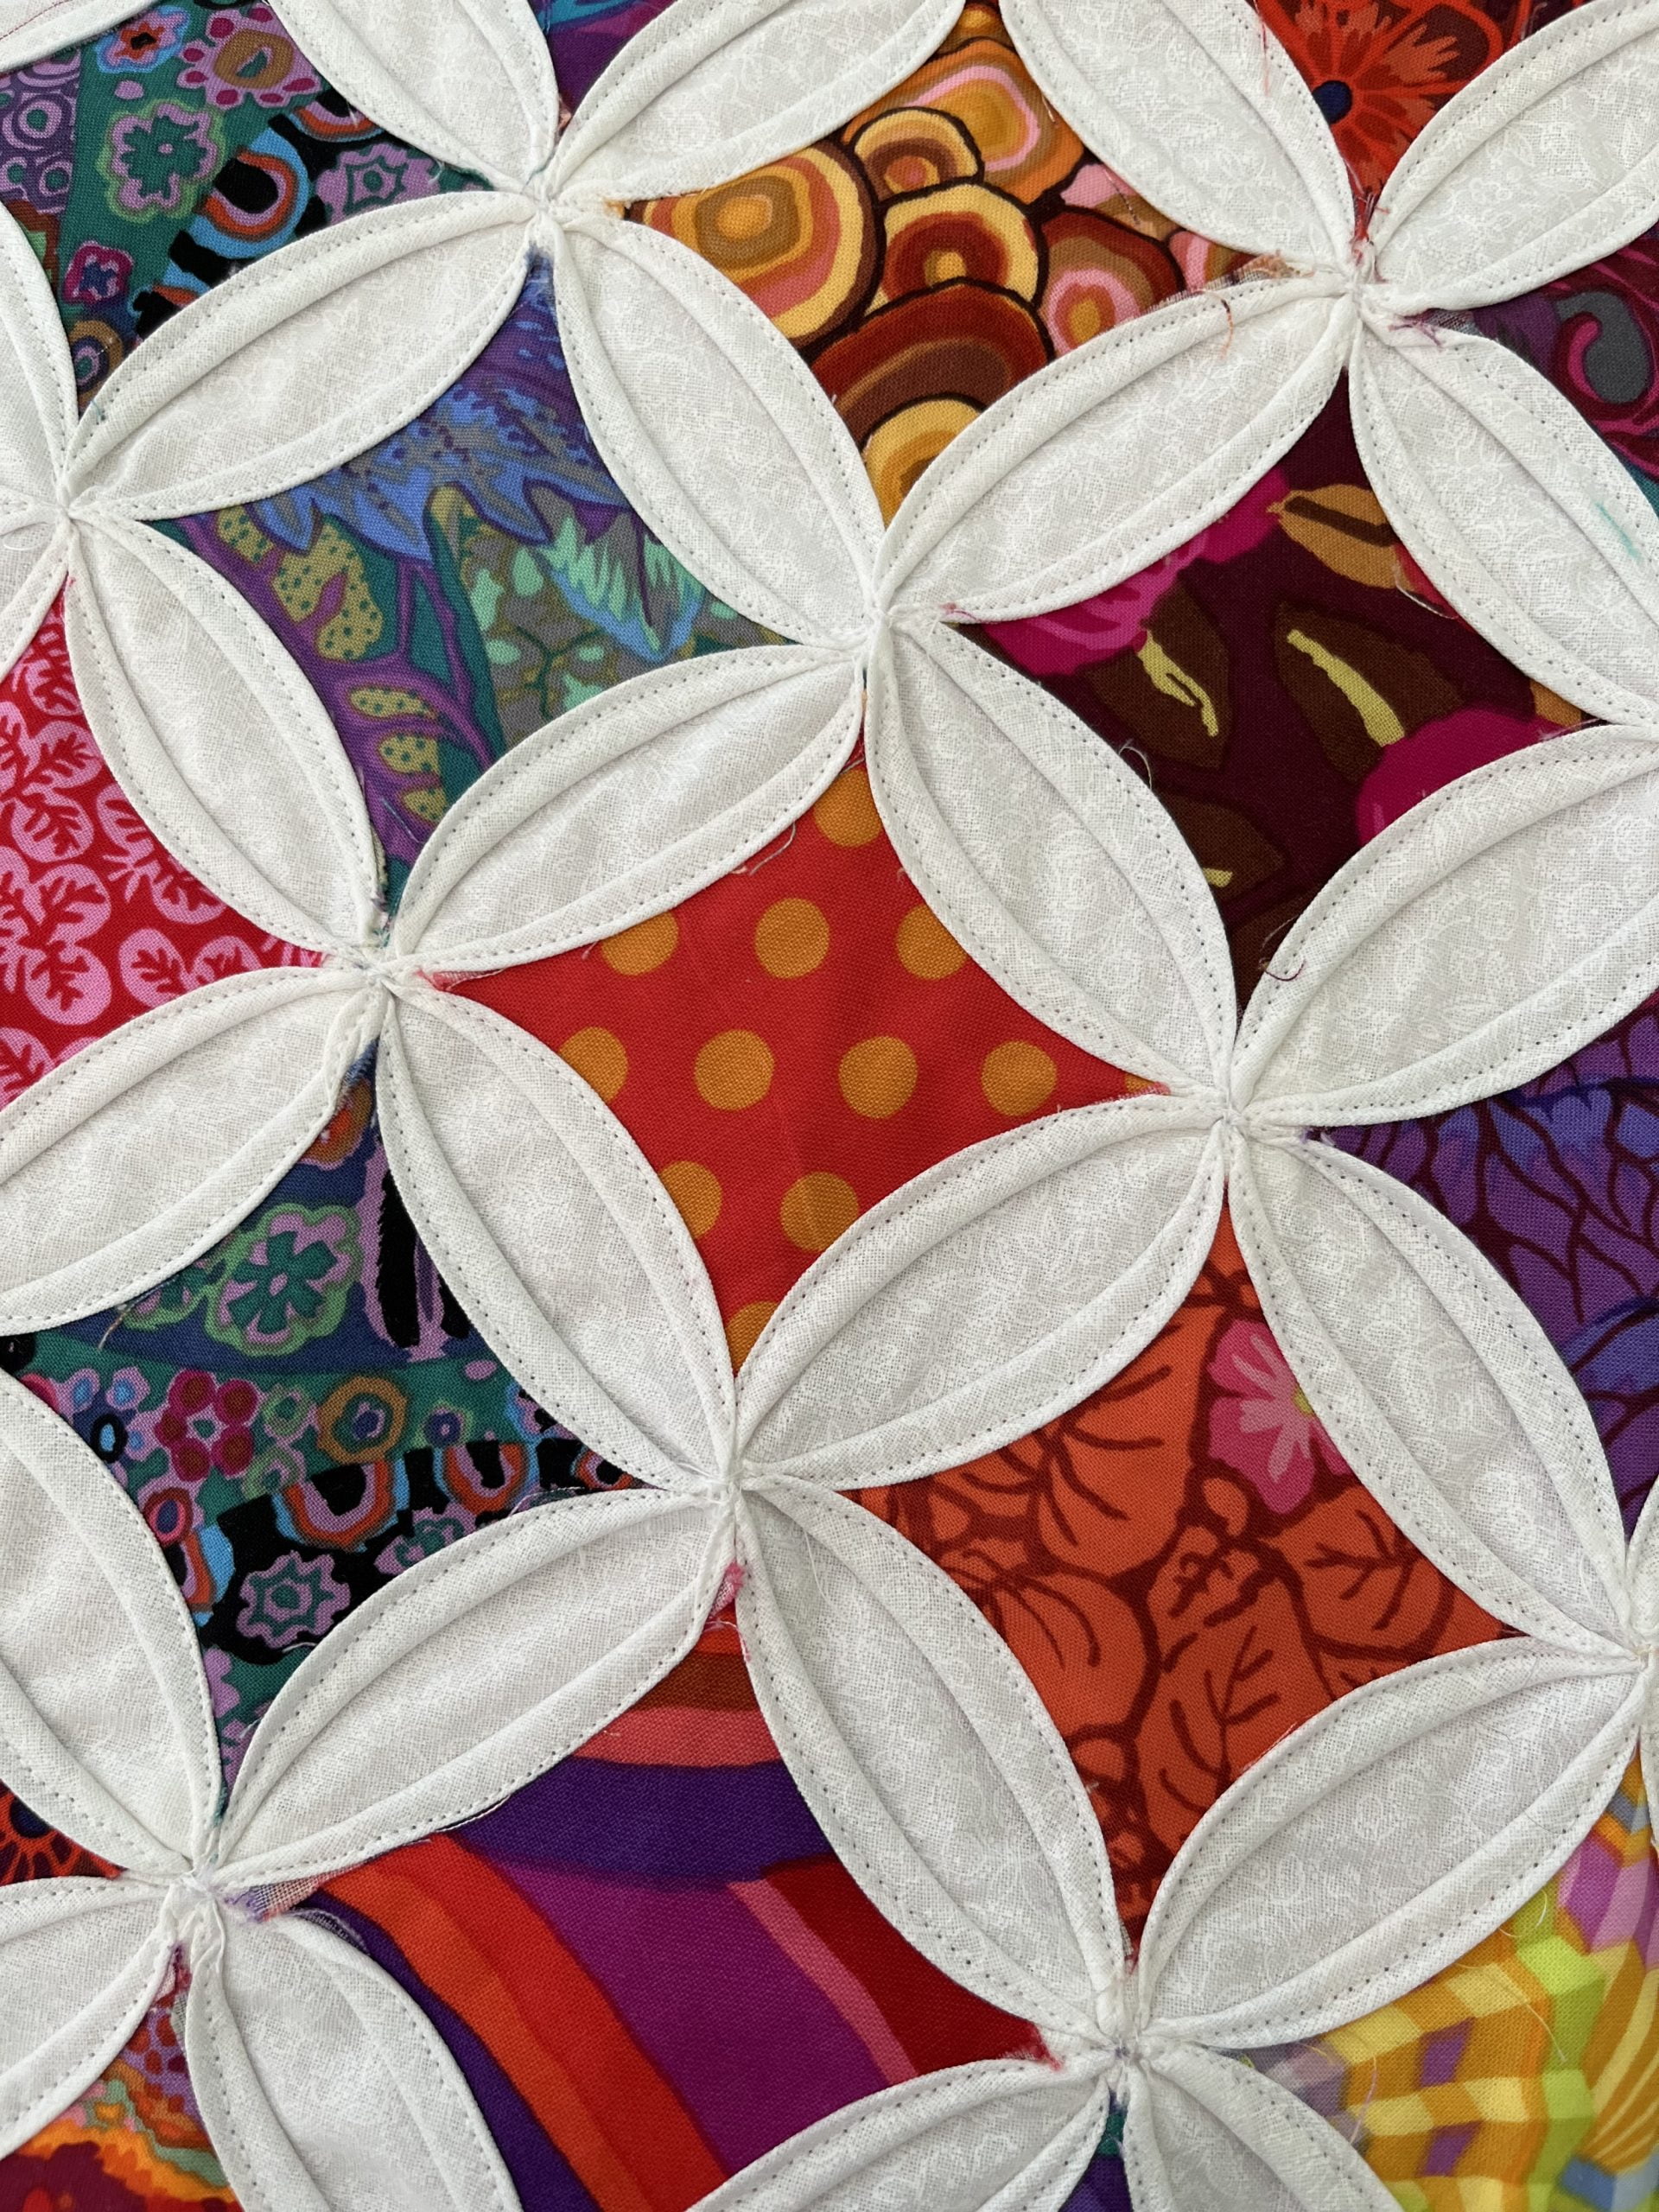 Cathedral Windows Quilt On Your Sewing Machine with Leonie Fraser - 15 March 24